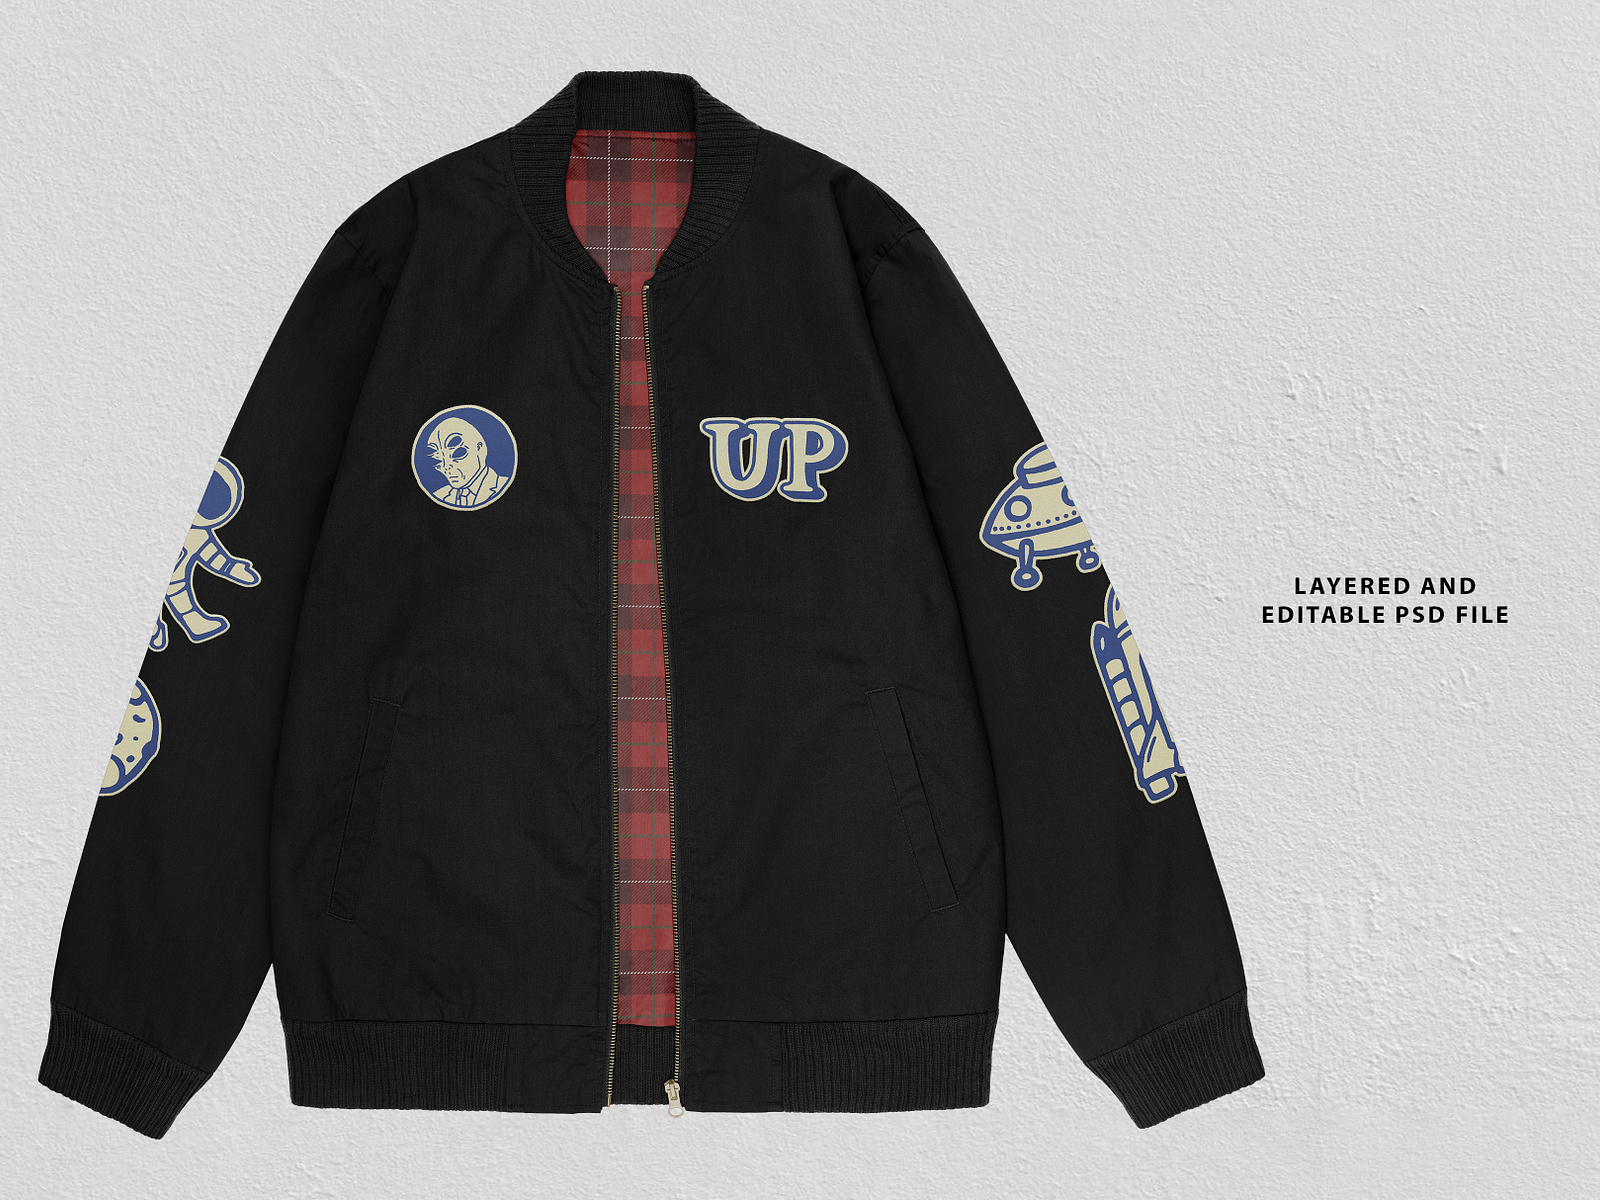 Realistic Bomber Jacket Mockup by Uncentrifuged Pressure on Dribbble